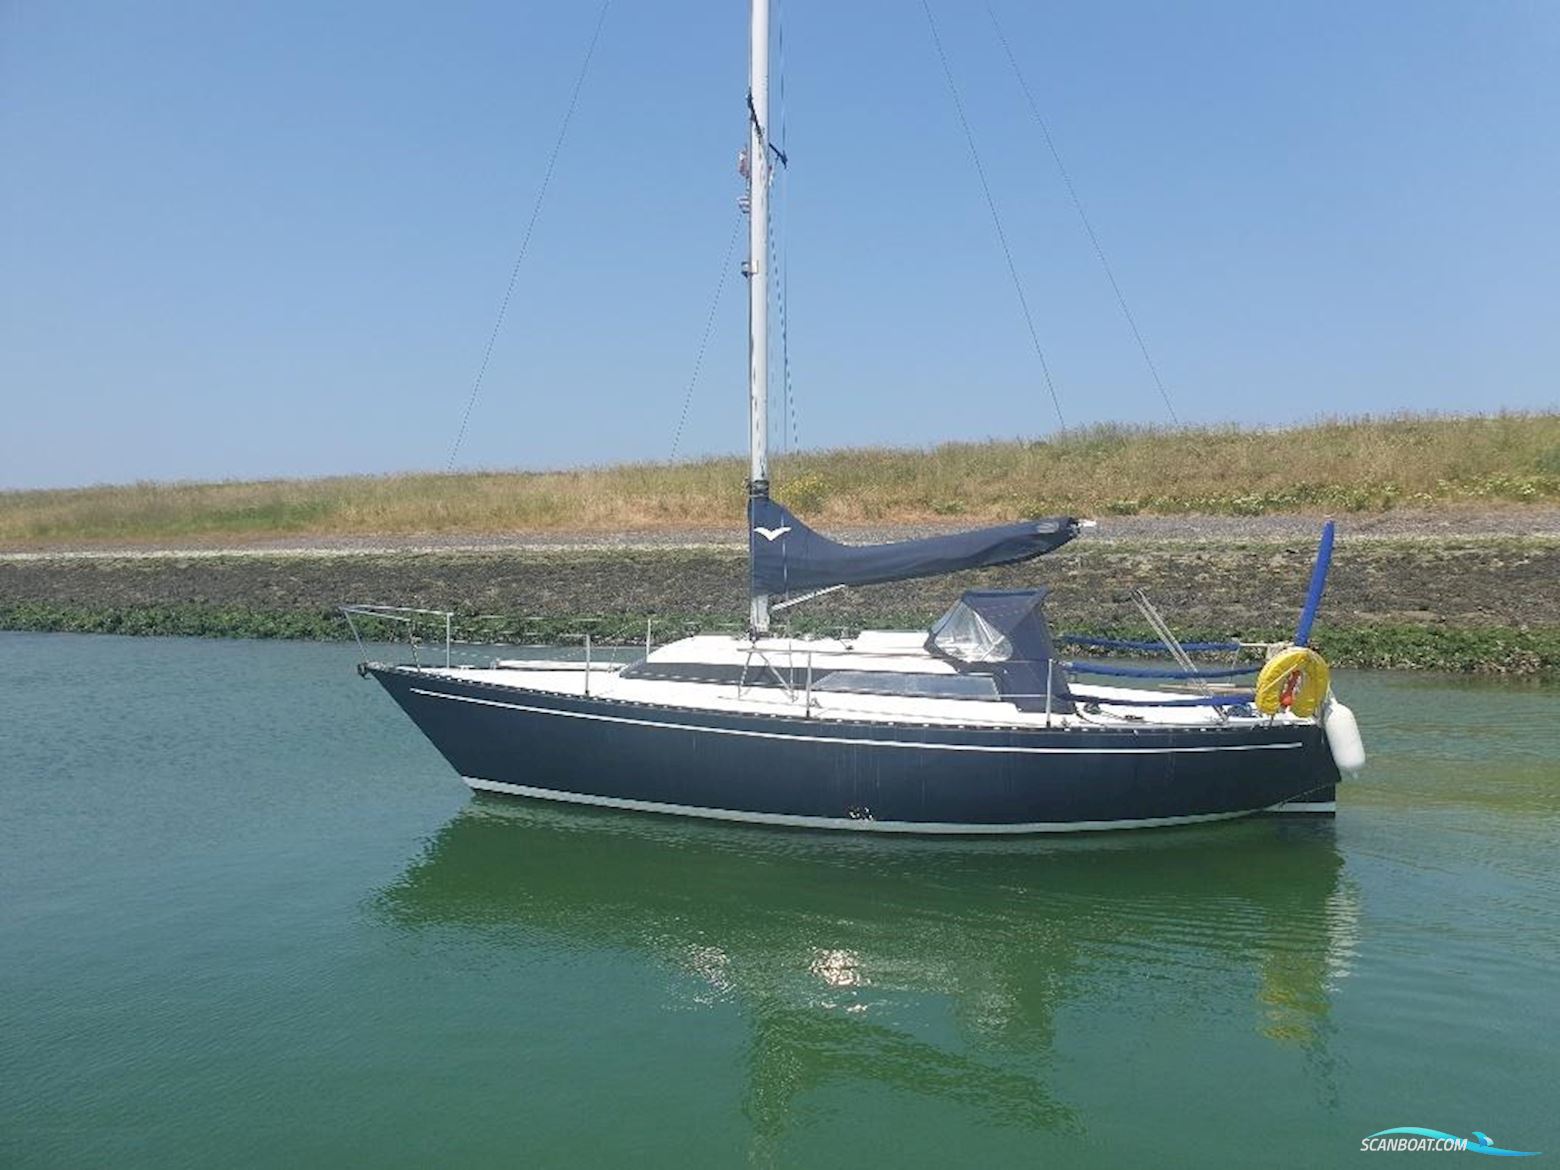 Standfast Loper 27 Sailing boat 1979, with Renault engine, Germany